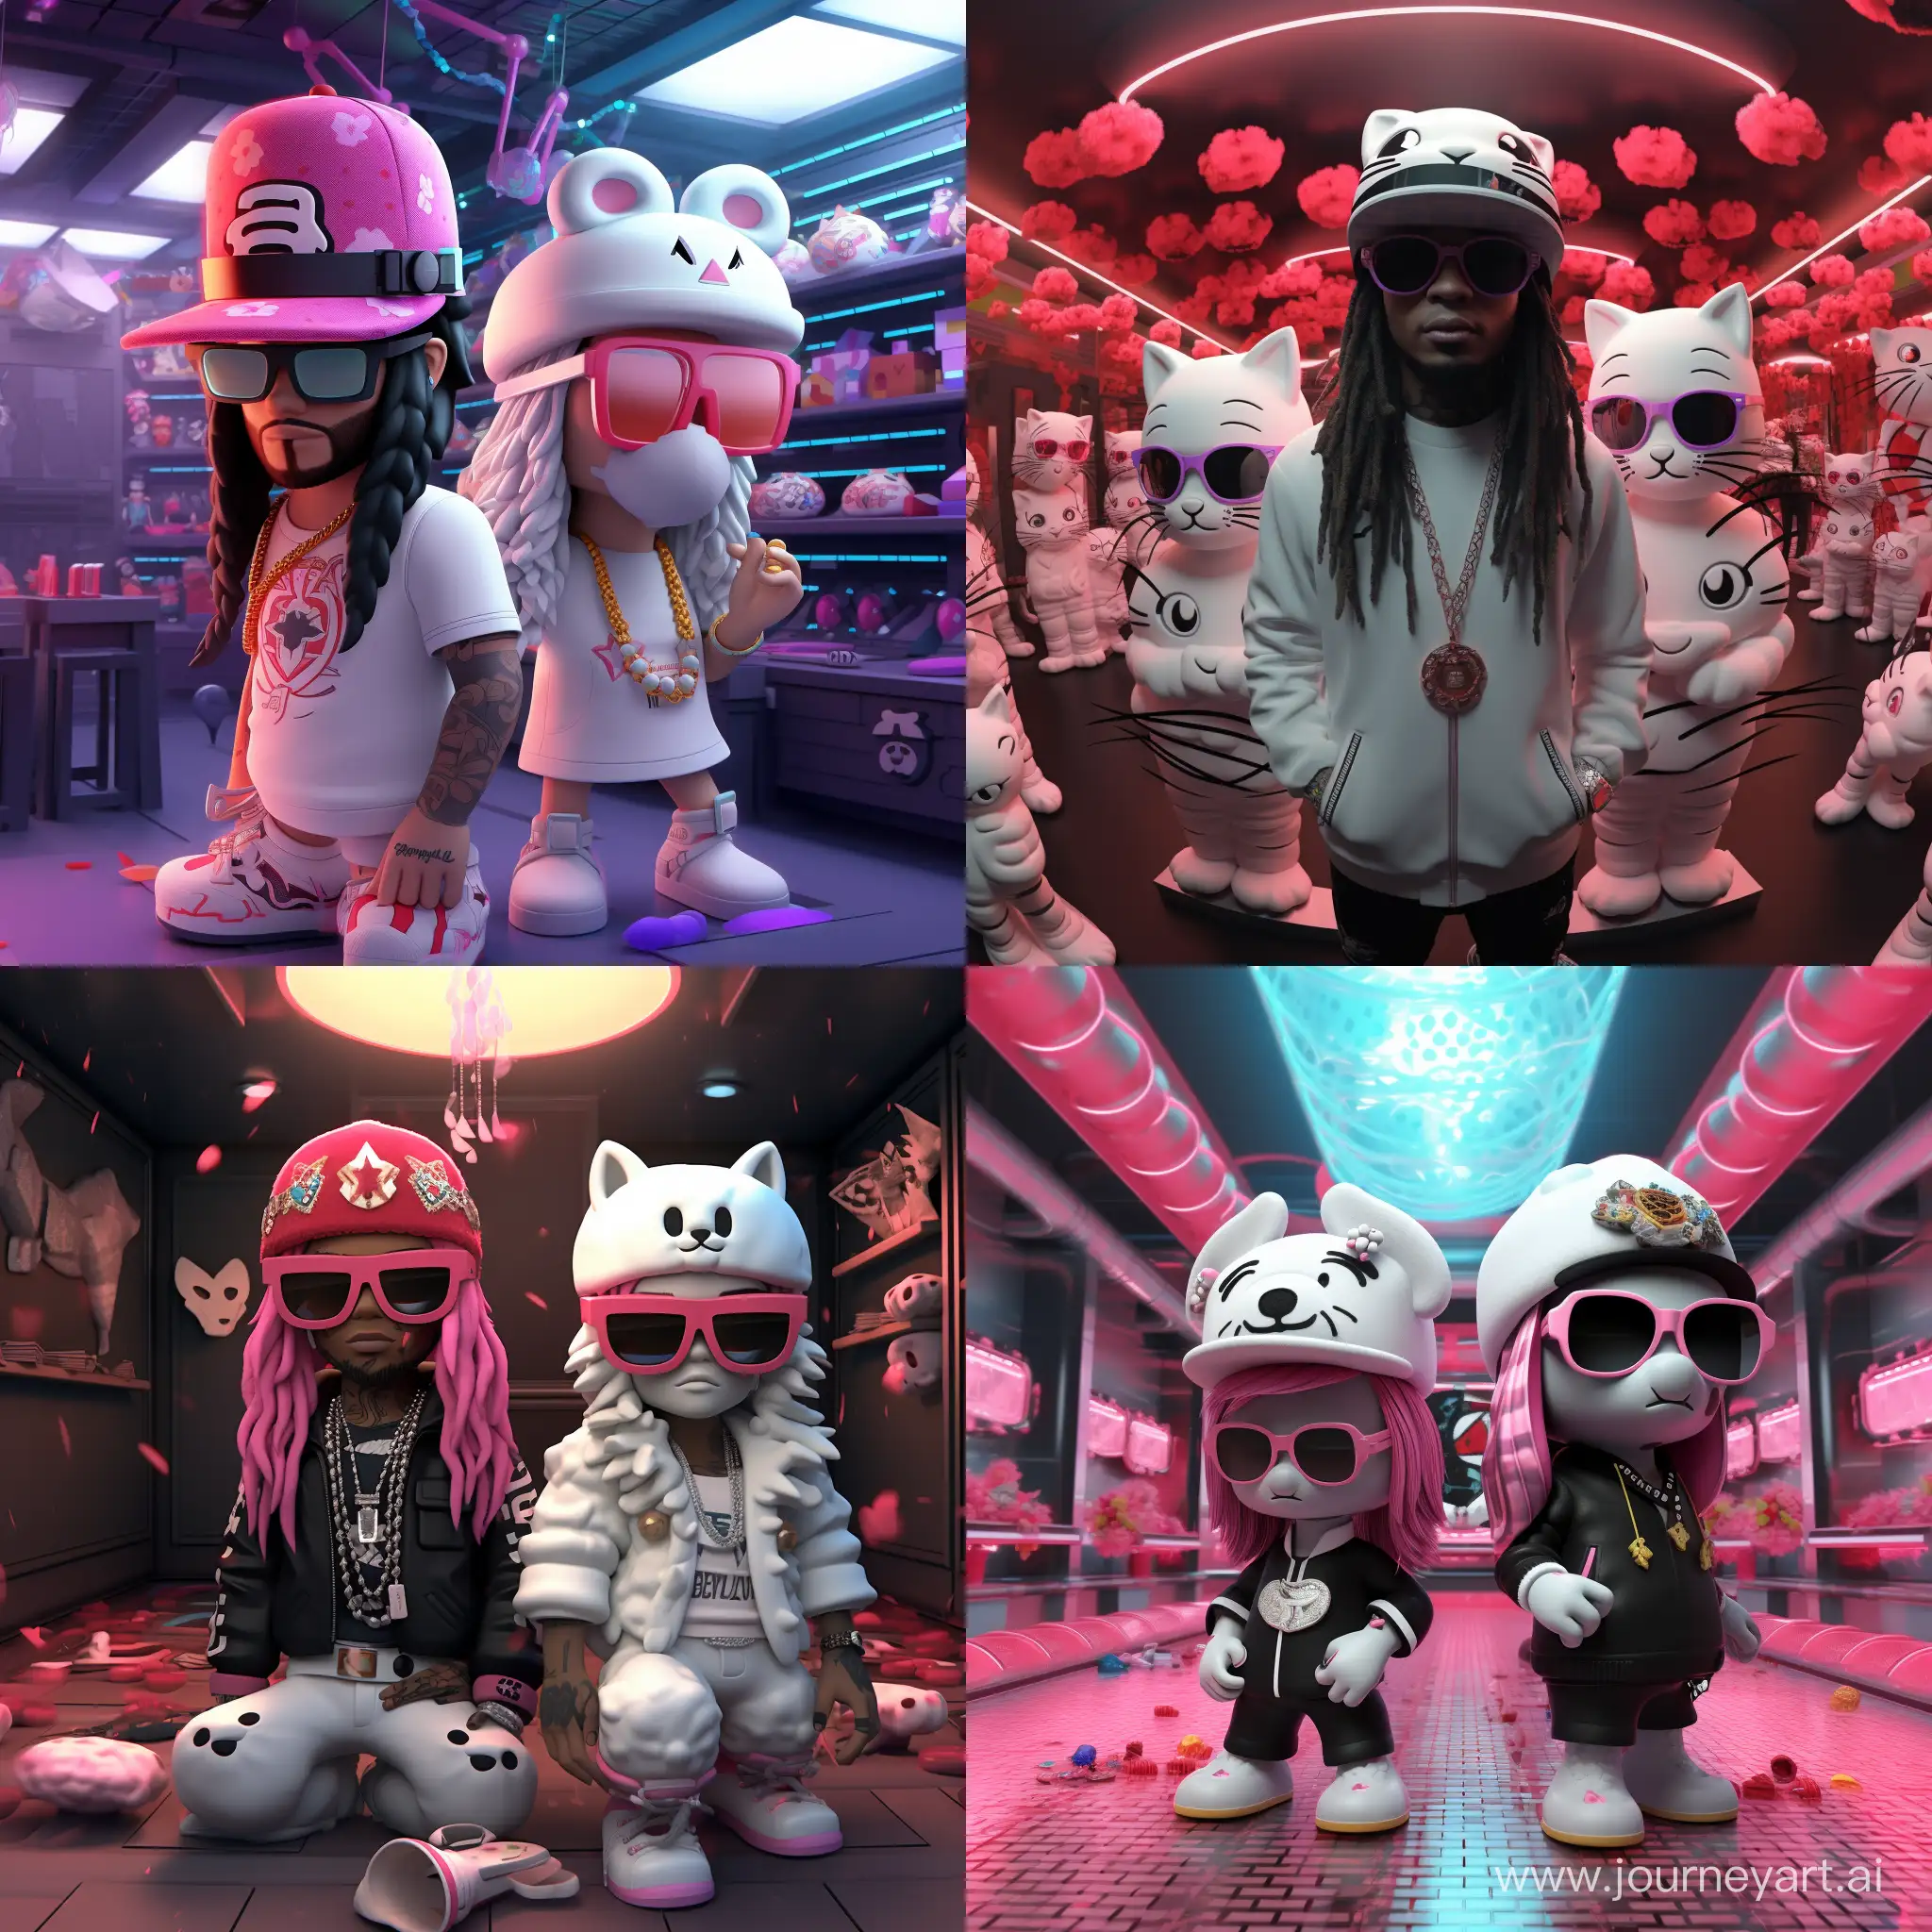 Cool-Rappers-in-Stylish-Hats-and-Sunglasses-Outside-Club-with-Hello-Kitty-in-3D